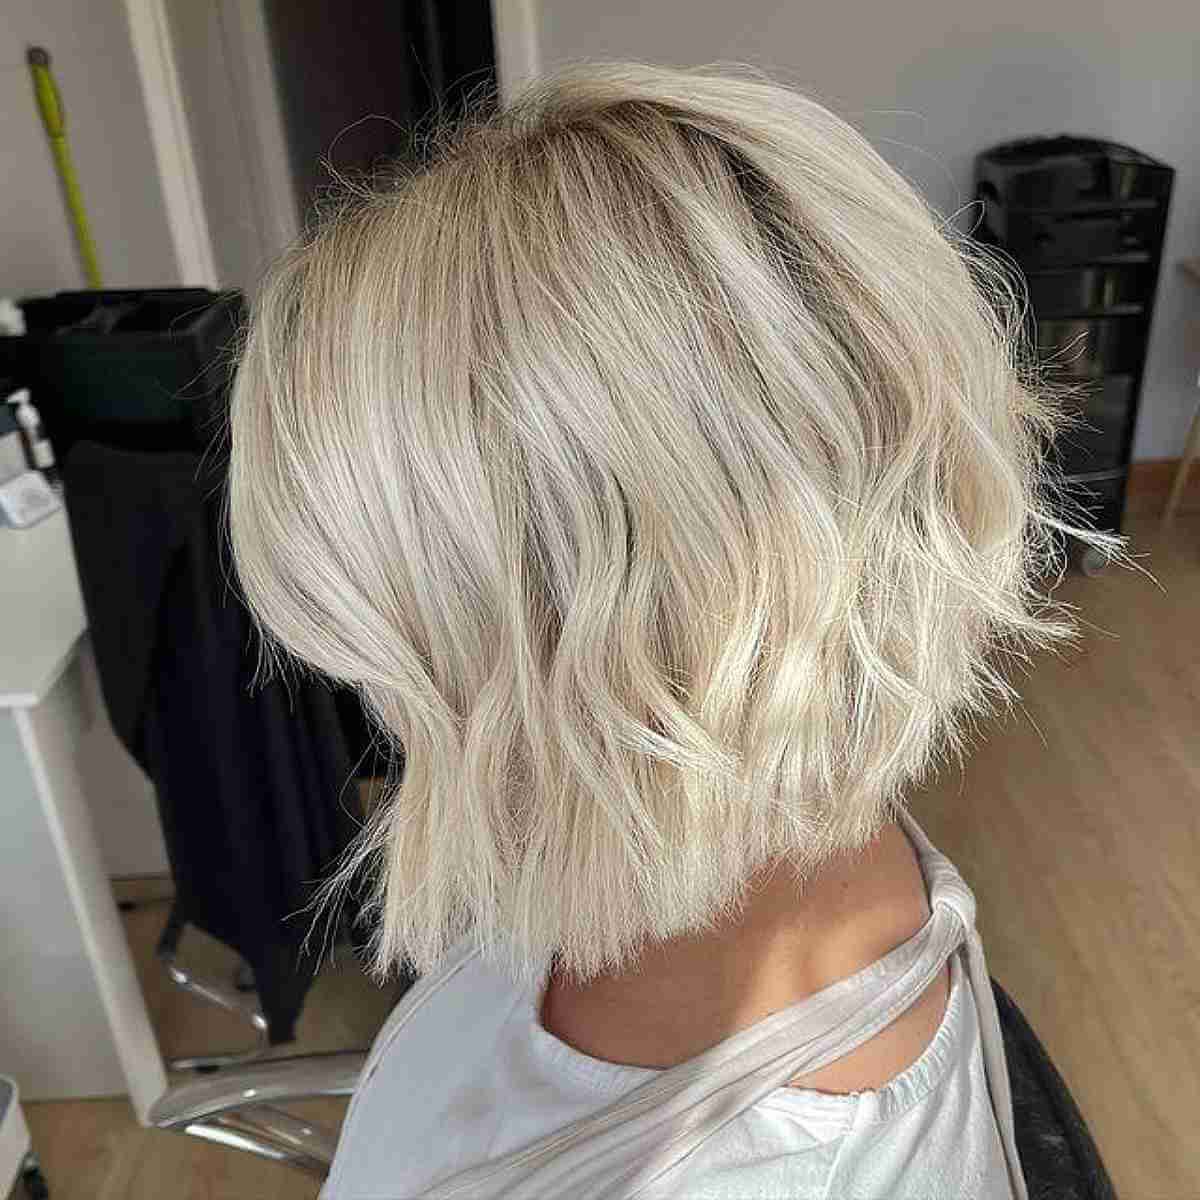 50+ Inverted Bob Haircuts Women Are Getting In 2022 Within Widely Used Icy Blonde Inverted Bob Haircuts (View 4 of 20)